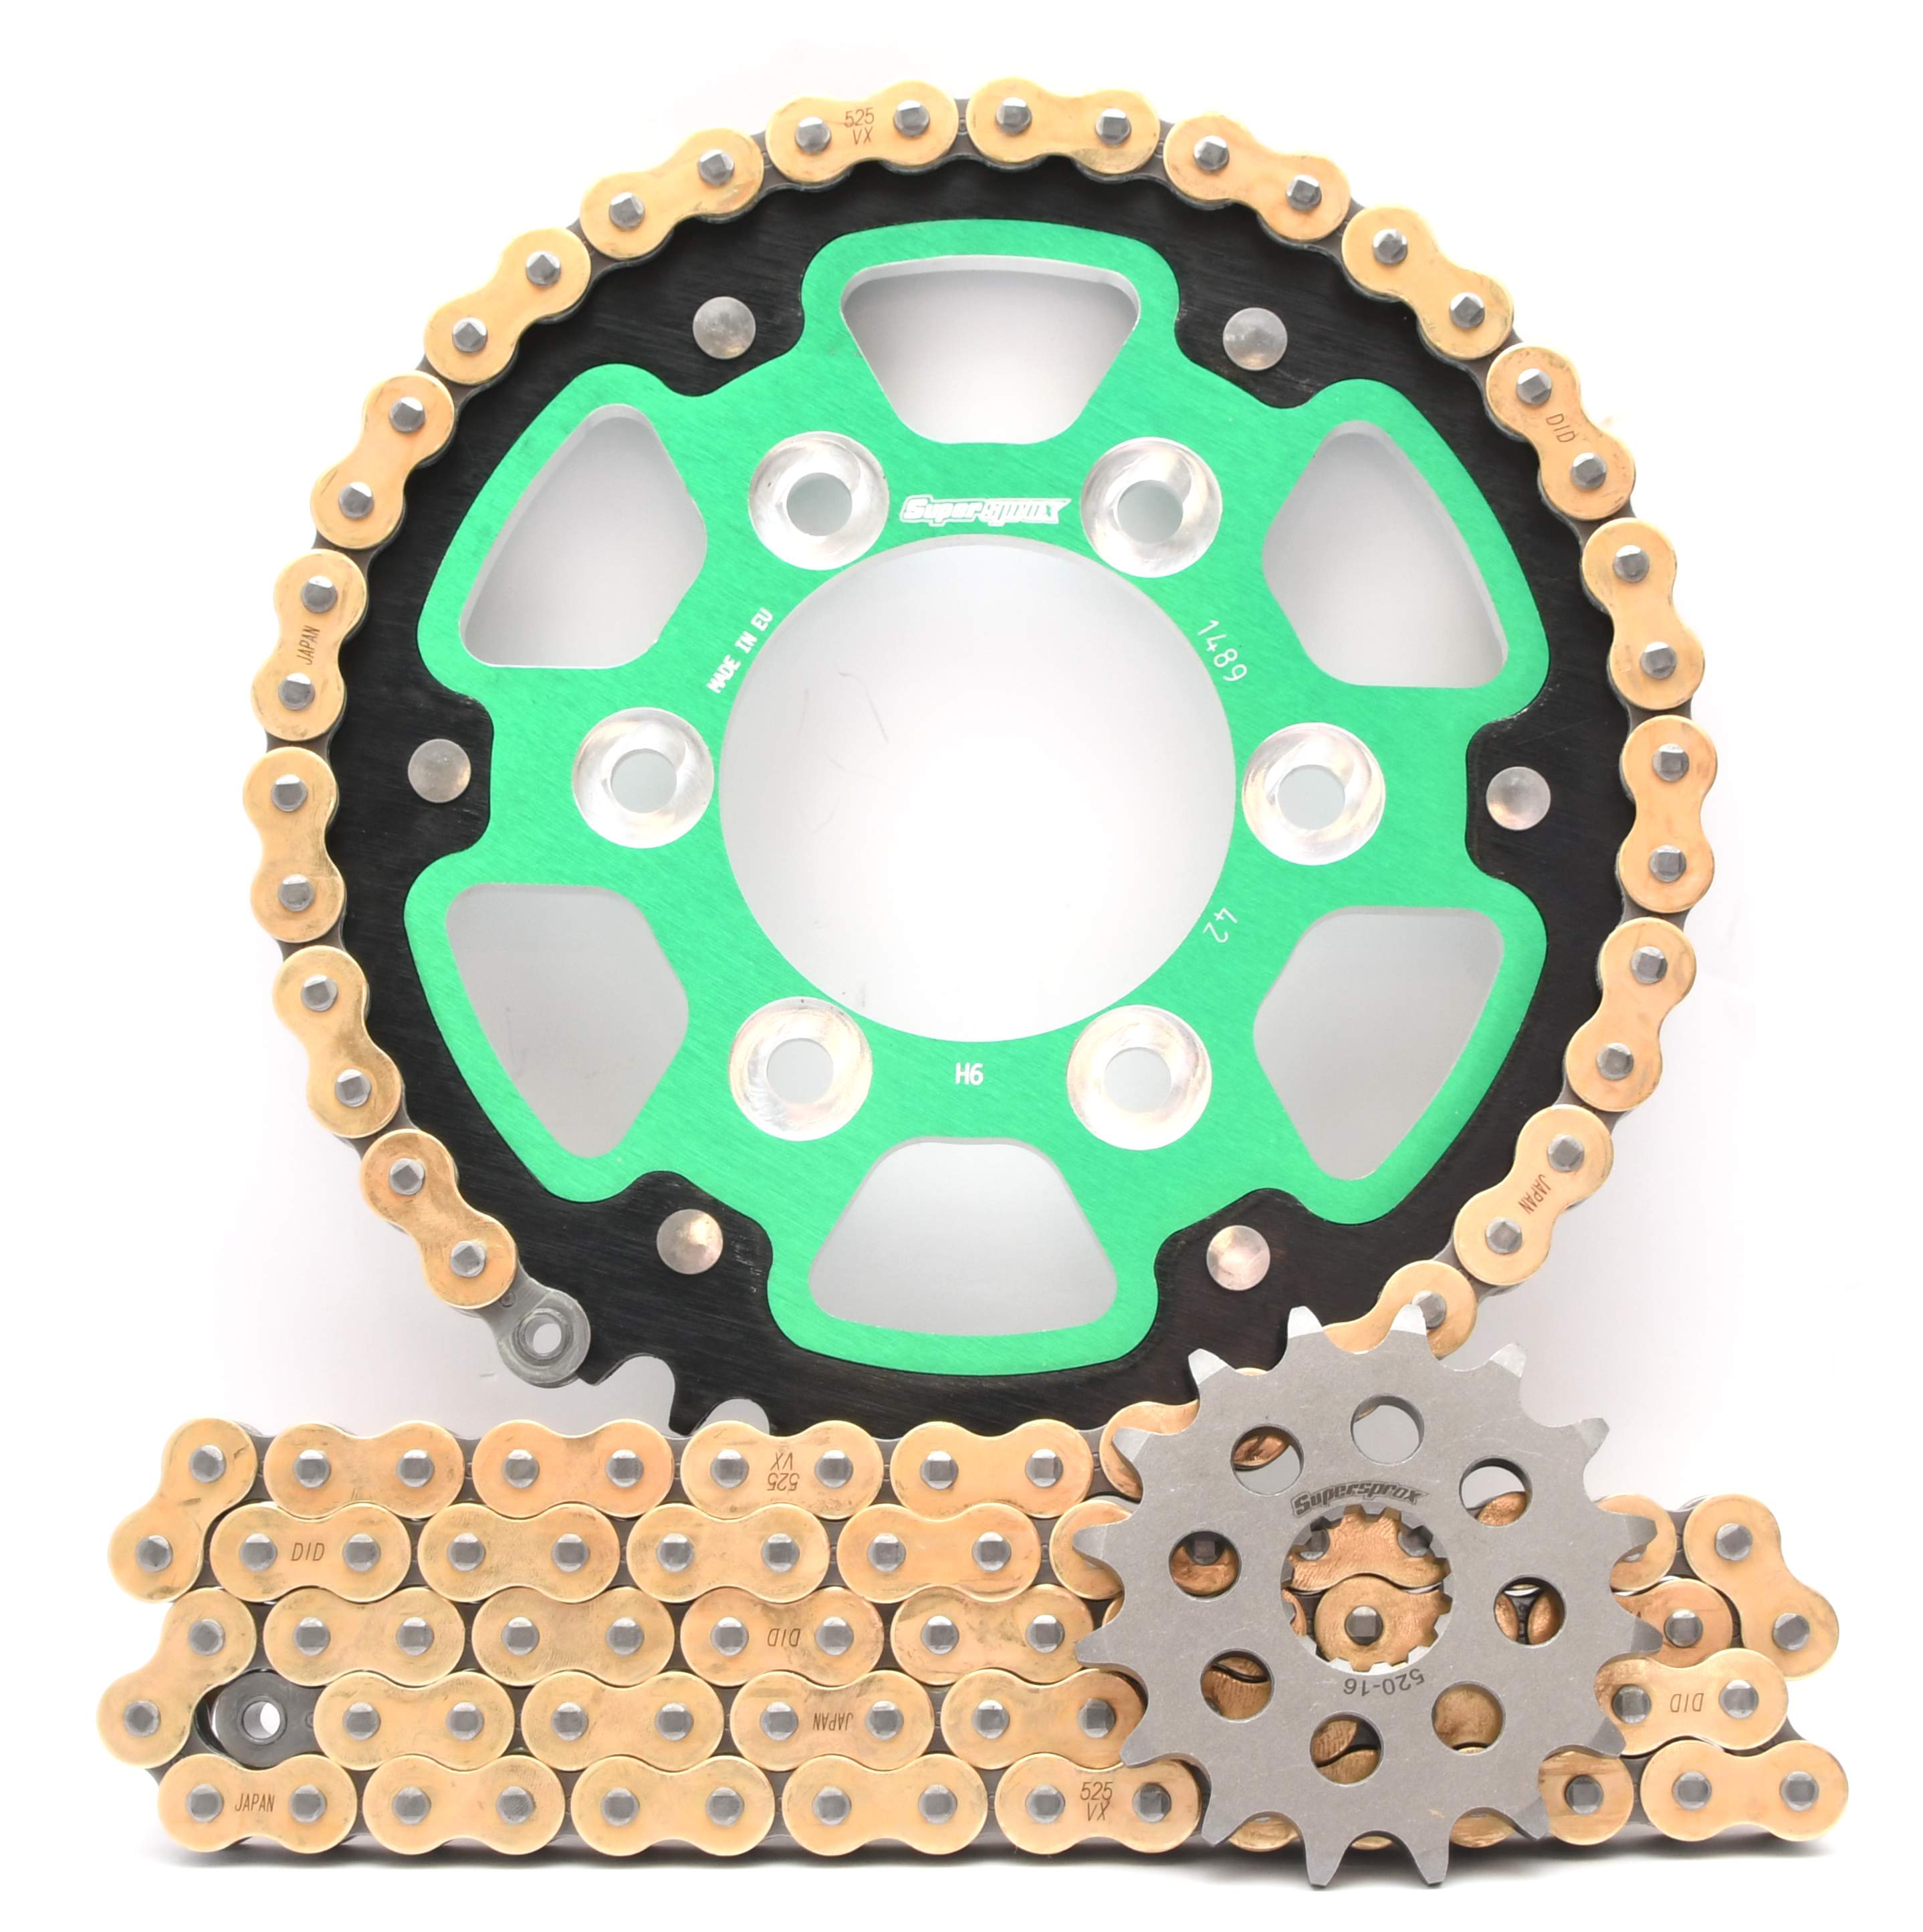 Supersprox Chain & Sprocket Kit for Kawasaki Z900RS 2018> - Standard Gearing